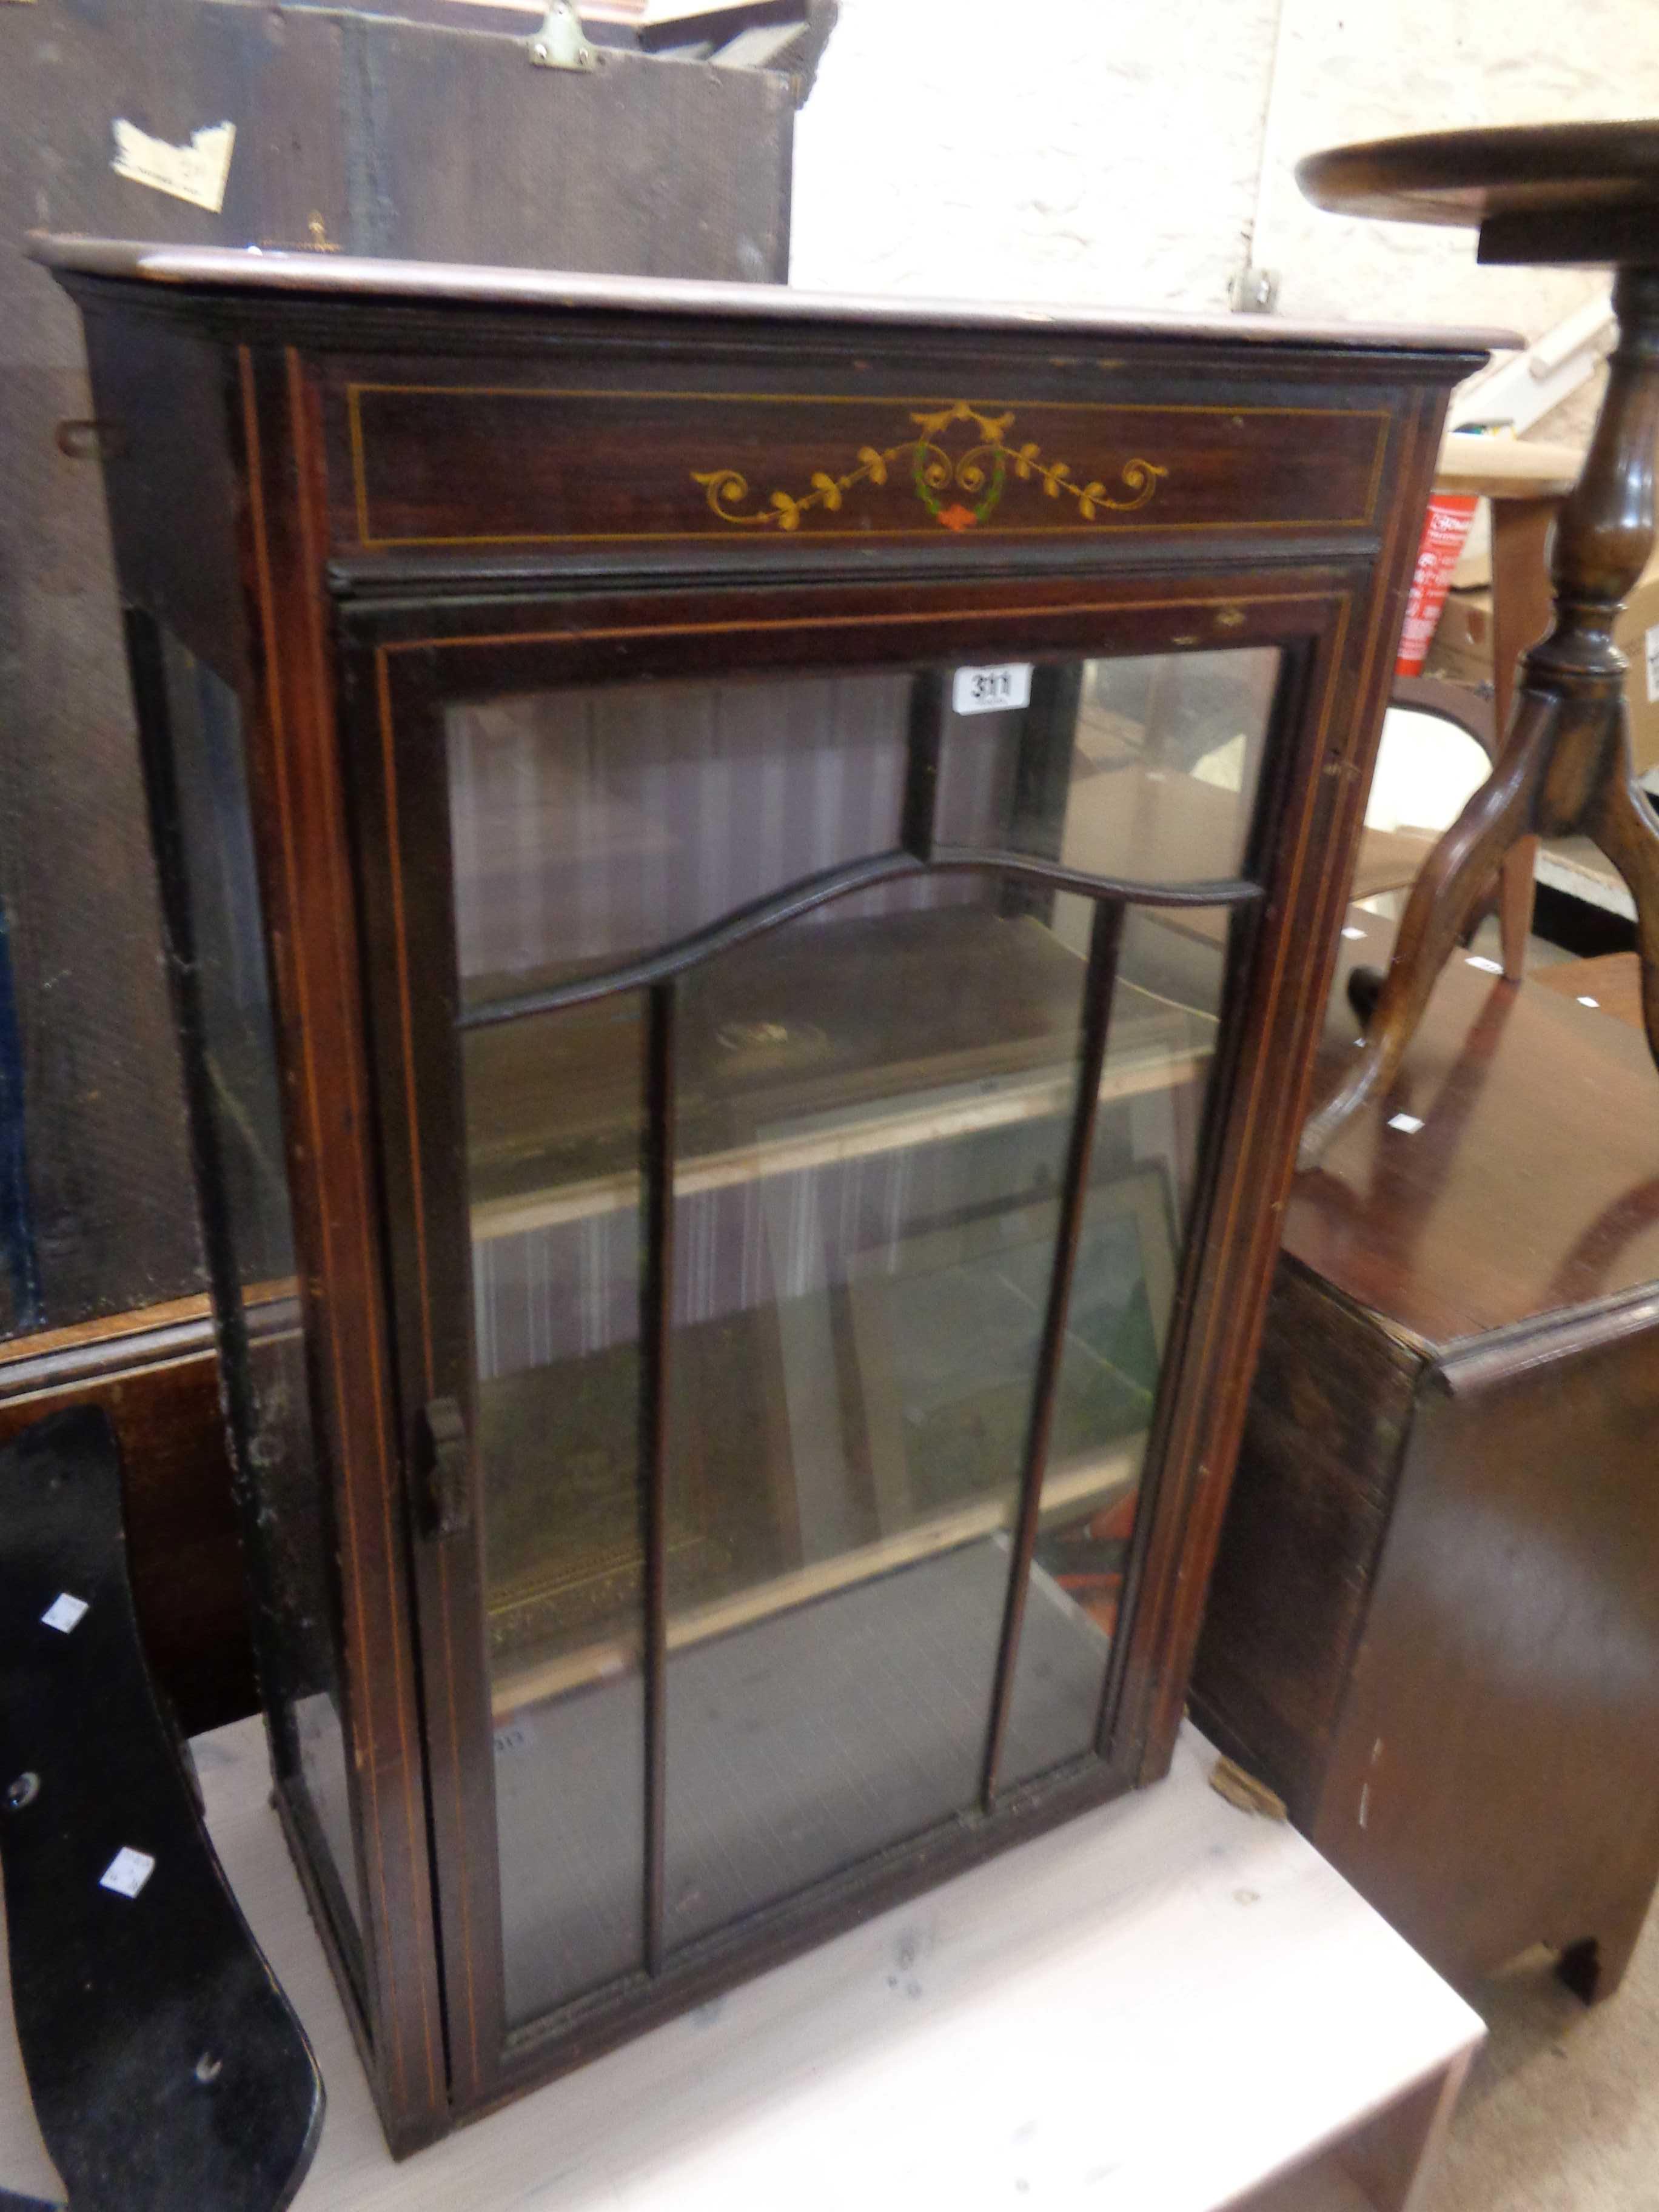 A 60cm Edwardian mahogany display cabinet with painted decoration and material lined shelves